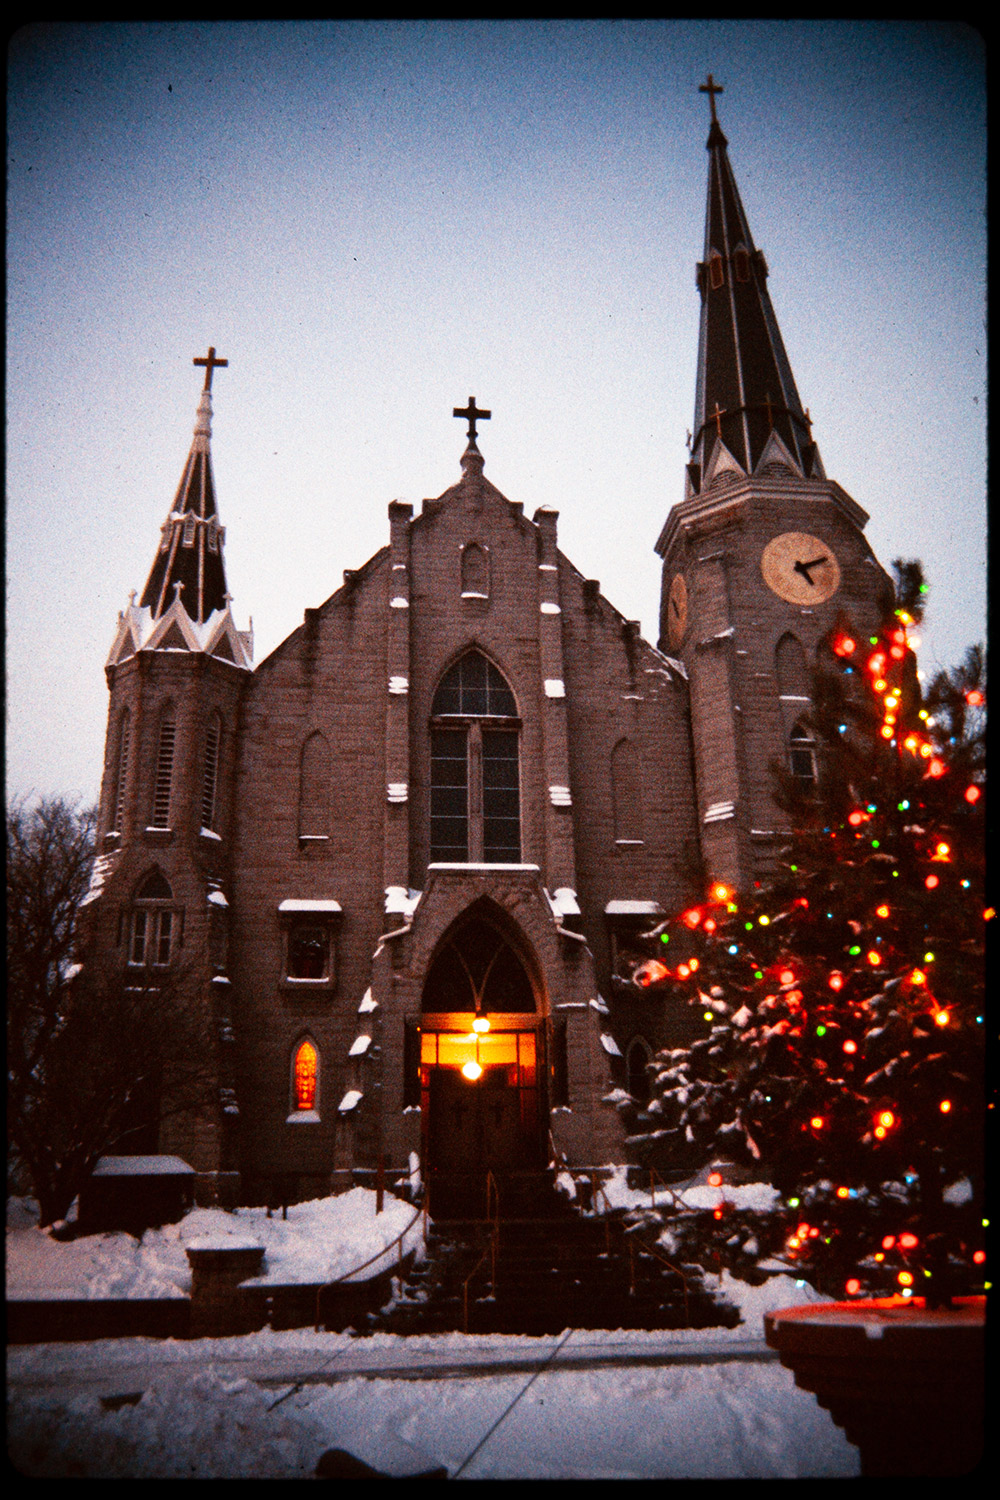 The Christmas tree in front of St. John's.